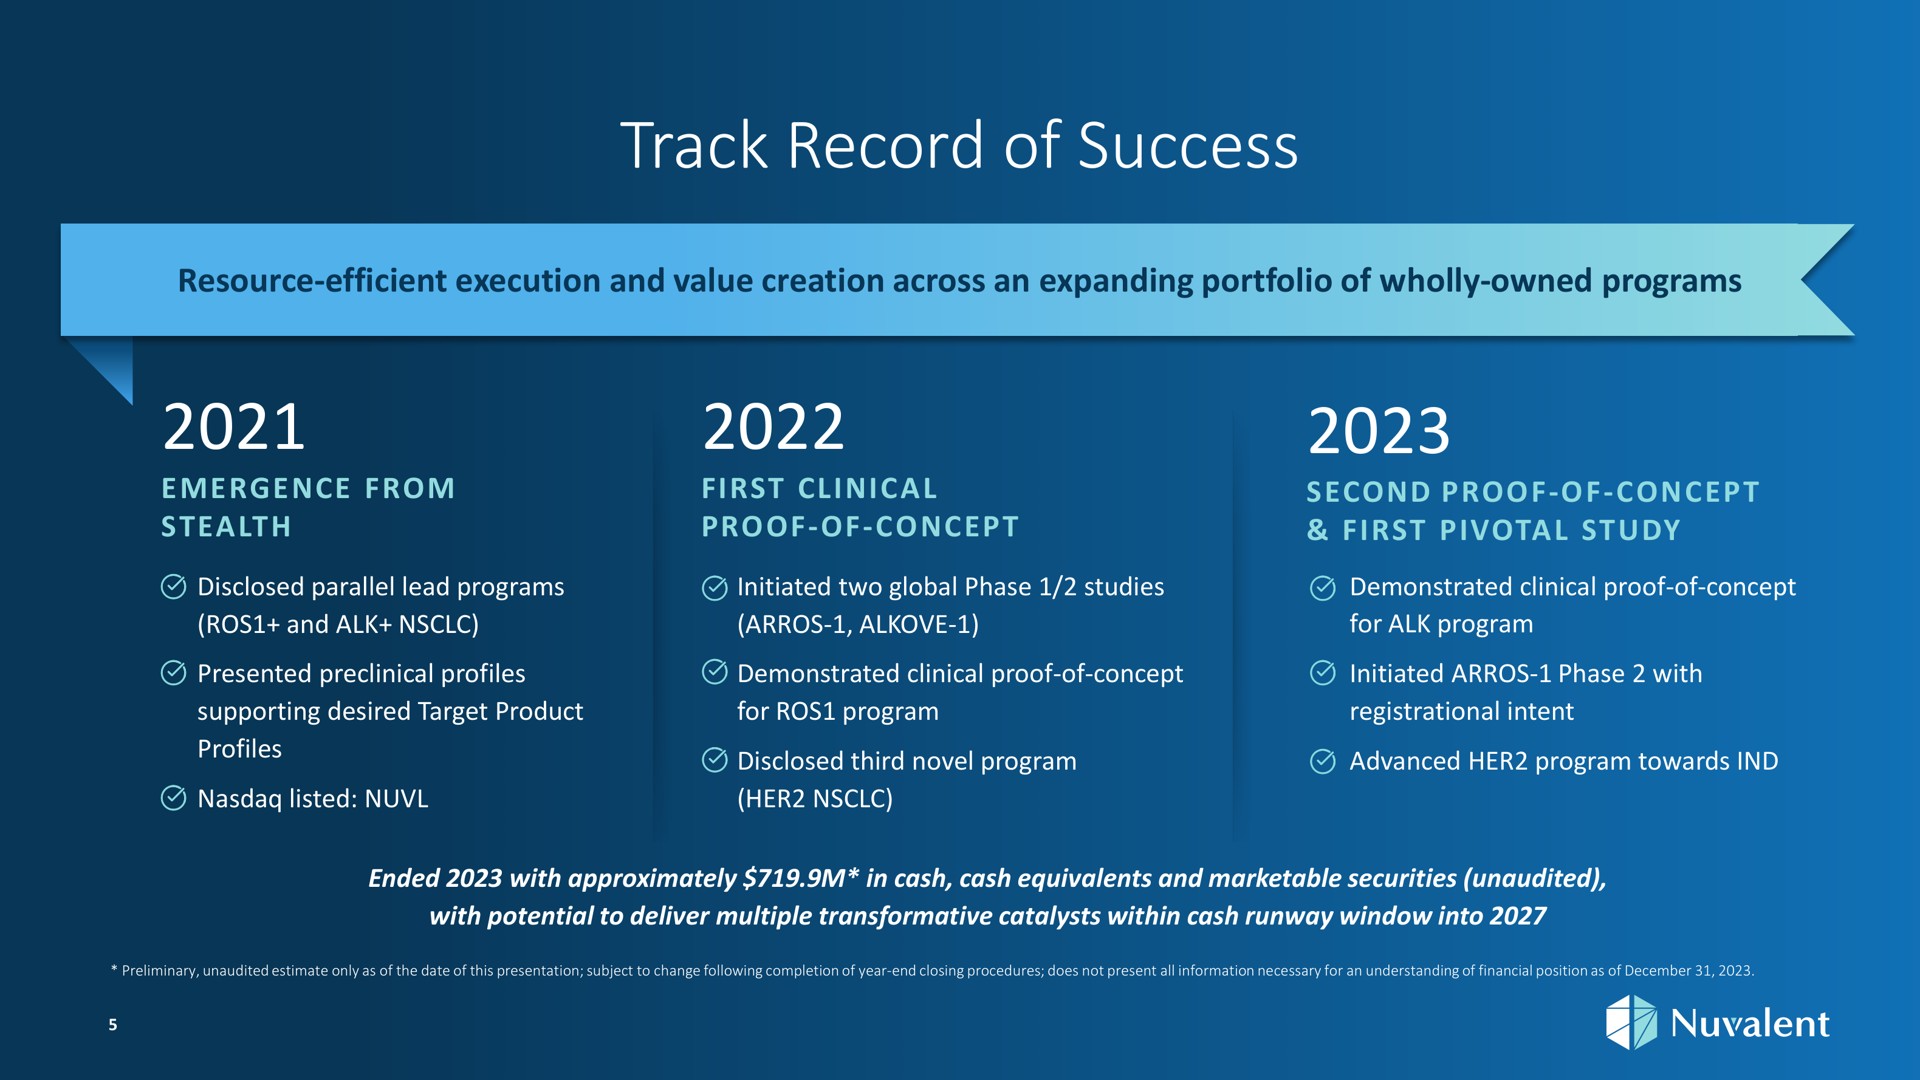 track record of success resource efficient execution and value creation across an expanding portfolio wholly owned programs my a epee emergence from stealth first clinical proof of concept second proof of concept first pivotal study disclosed parallel lead programs initiated two global phase studies demonstrated clinical proof of concept and alk for alk program presented preclinical profiles demonstrated clinical proof of concept initiated phase with supporting desired target product for program mined ale me disclosed third novel program advanced her program towards listed her ended with approximately in cash cash equivalents and marketable securities unaudited with potential to deliver multiple transformative catalysts within cash runway window into preliminary unaudited estimate only as the date this presentation subject to change following completion year end closing procedures does not present all information necessary for an understanding financial position as a | Nuvalent